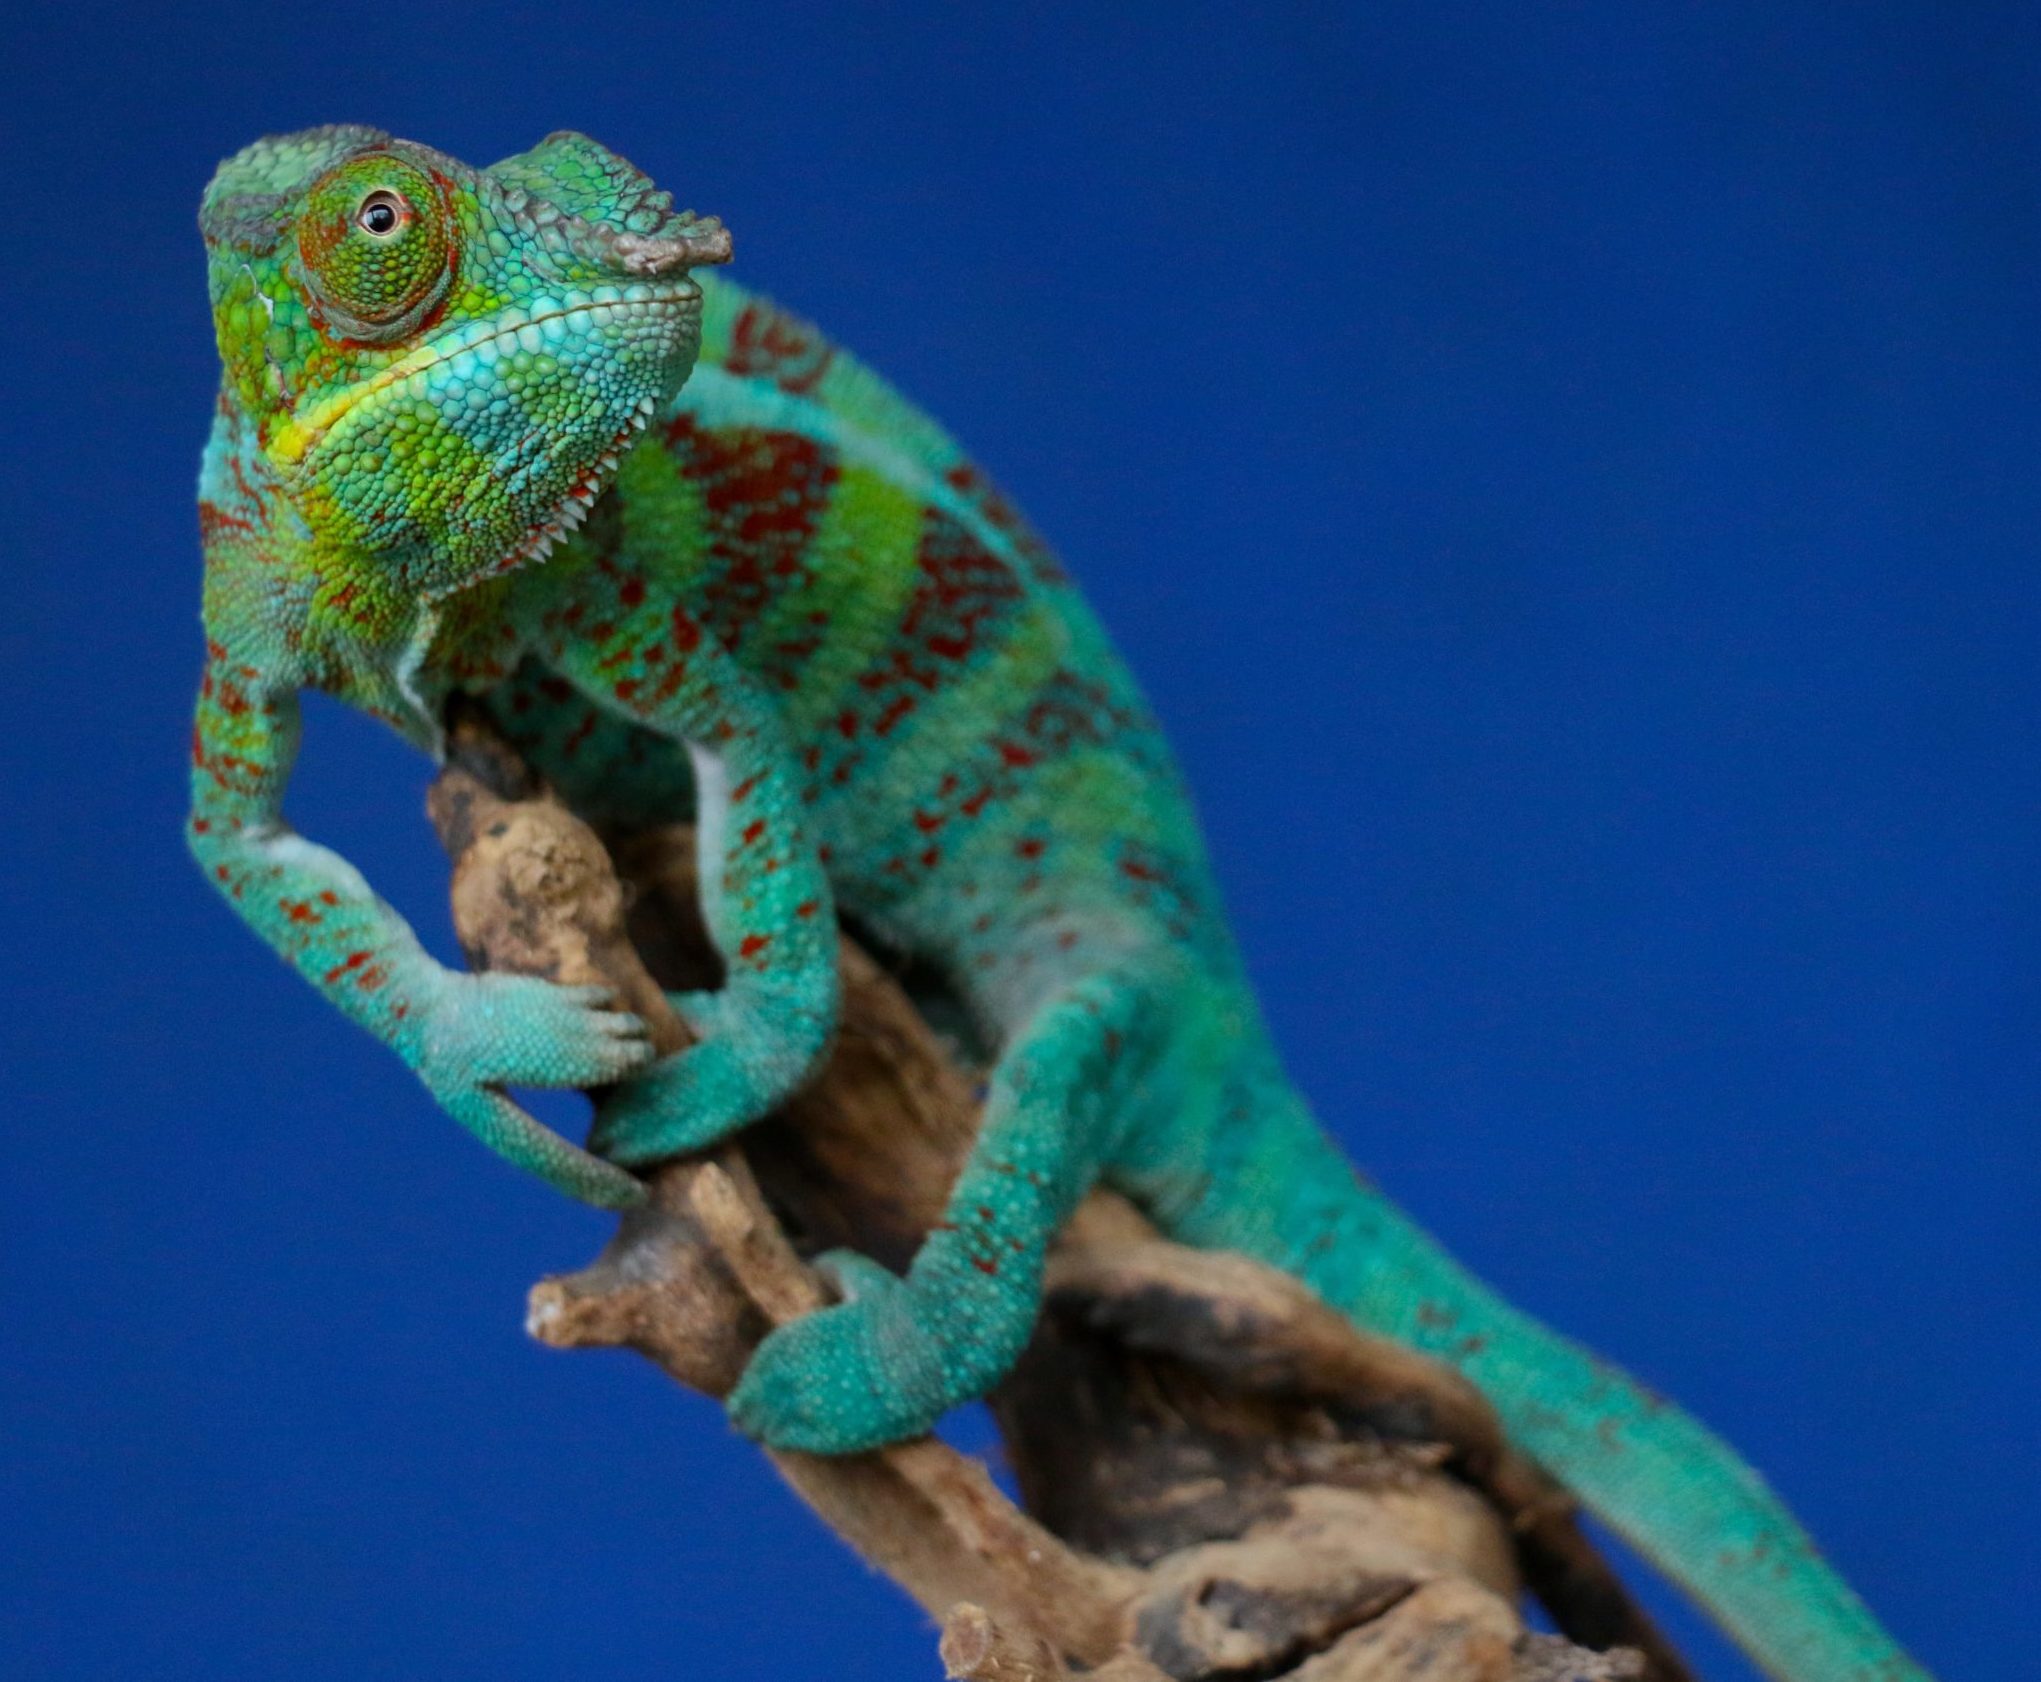 Panther Chameleon are only found in Madagascar.